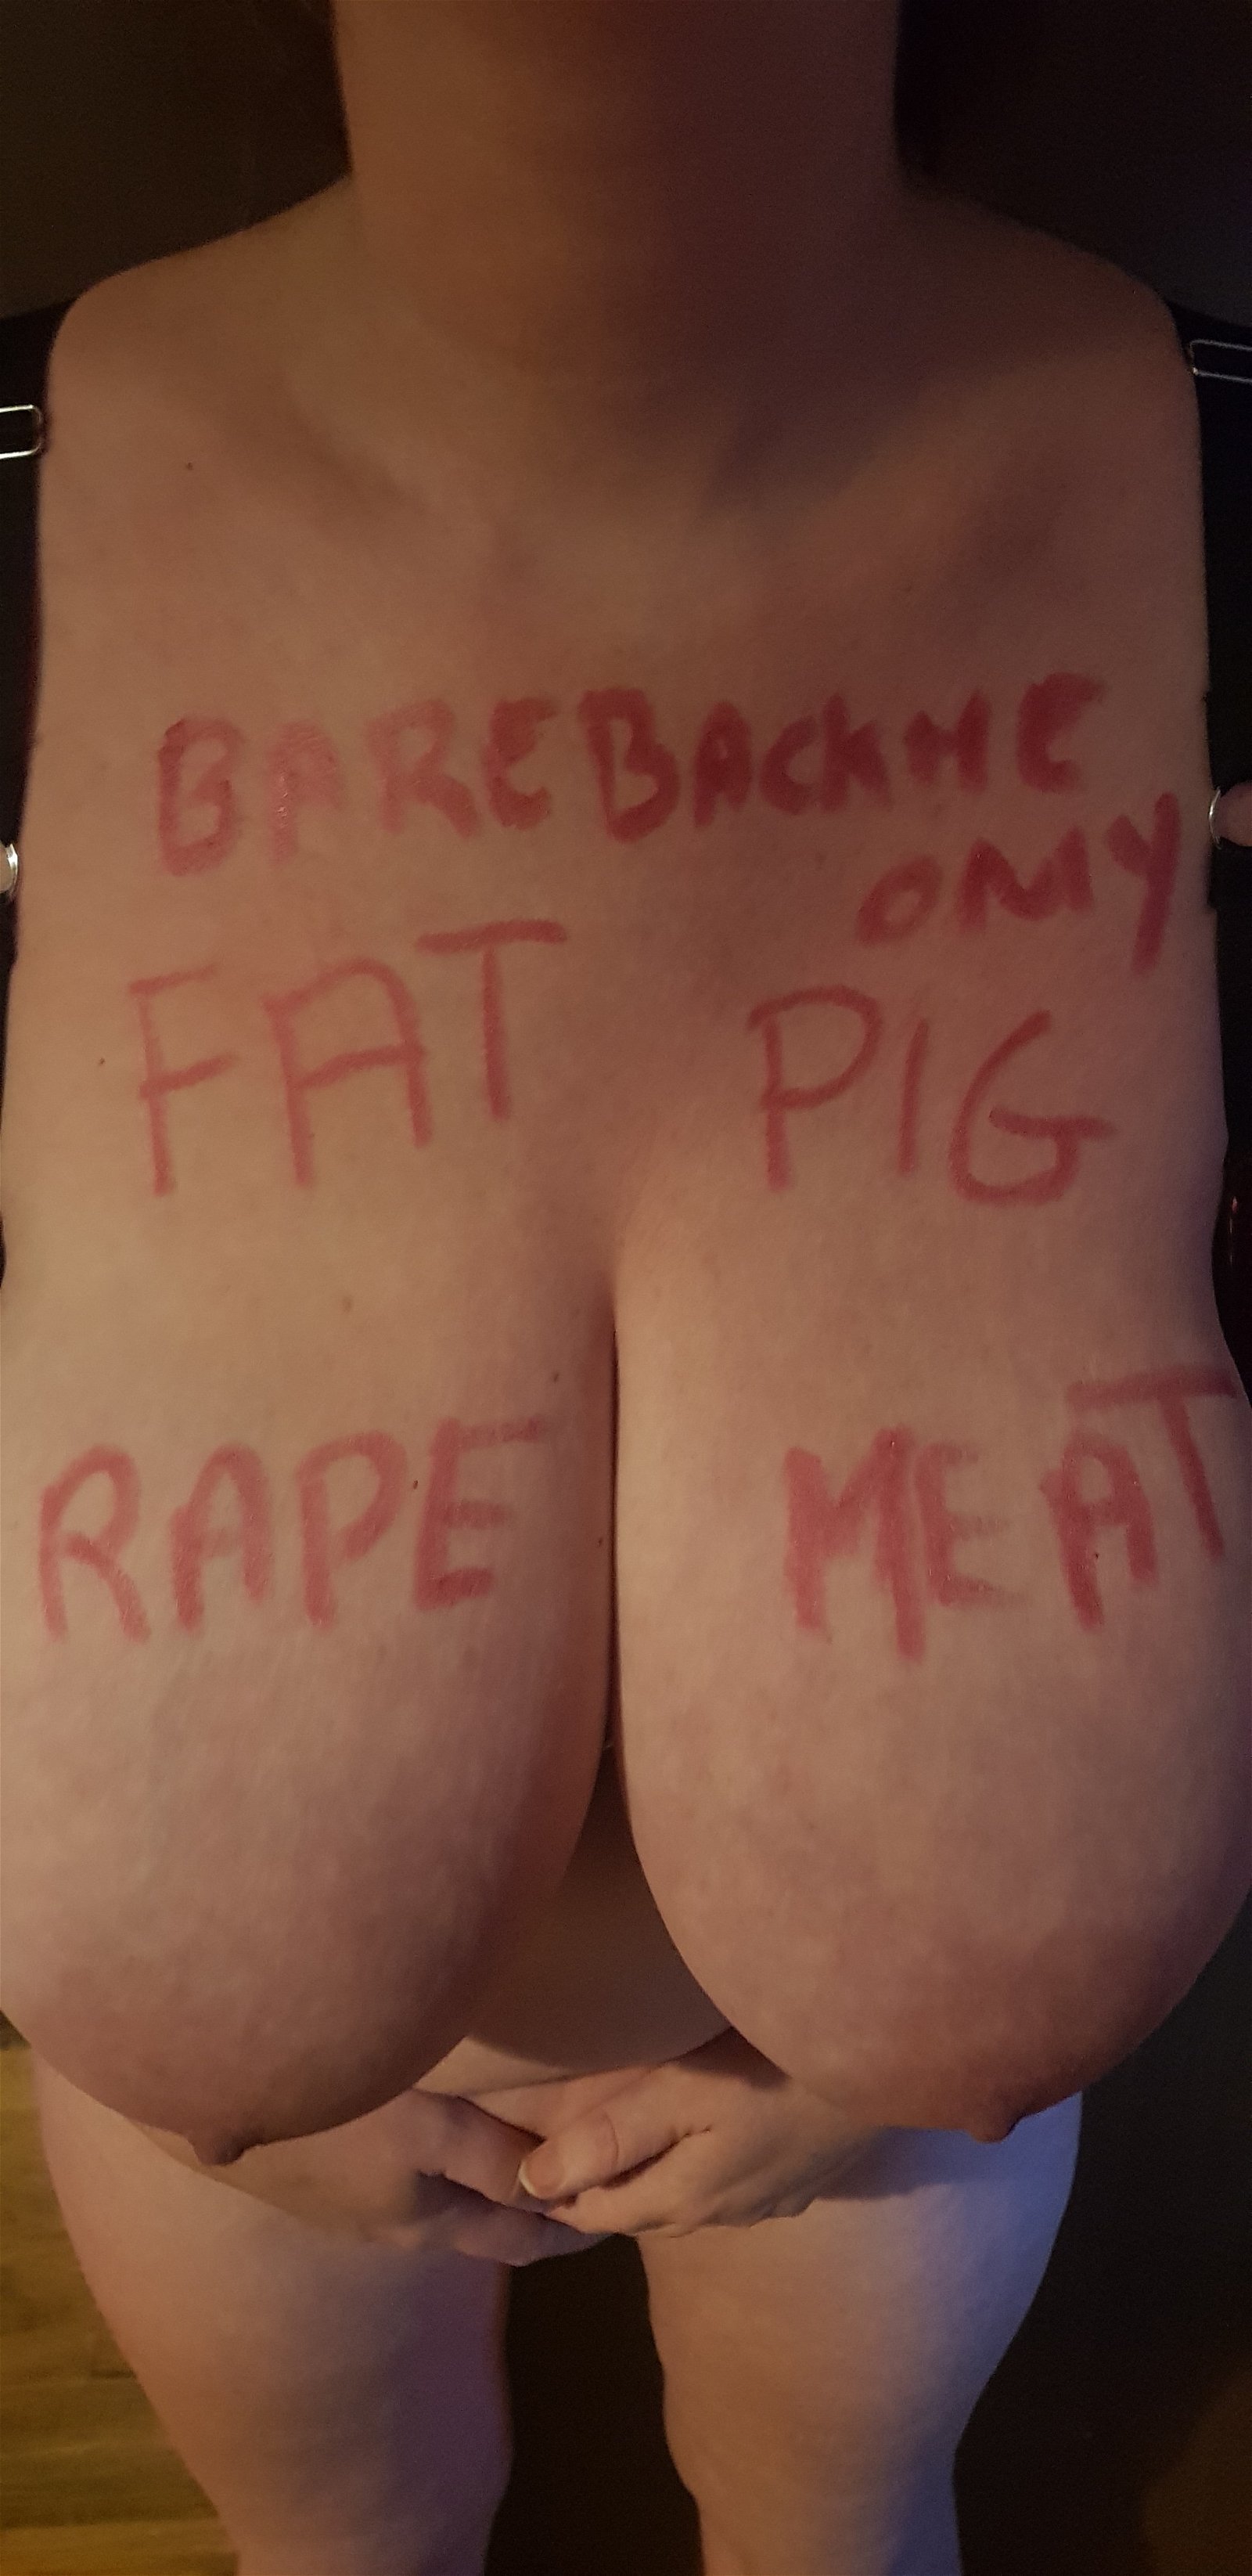 Watch the Photo by Daddiescumbucket with the username @Daddiescumbucket, posted on January 2, 2020. The post is about the topic Rape Bait Academy. and the text says 'mmmm let me know what you do to me'